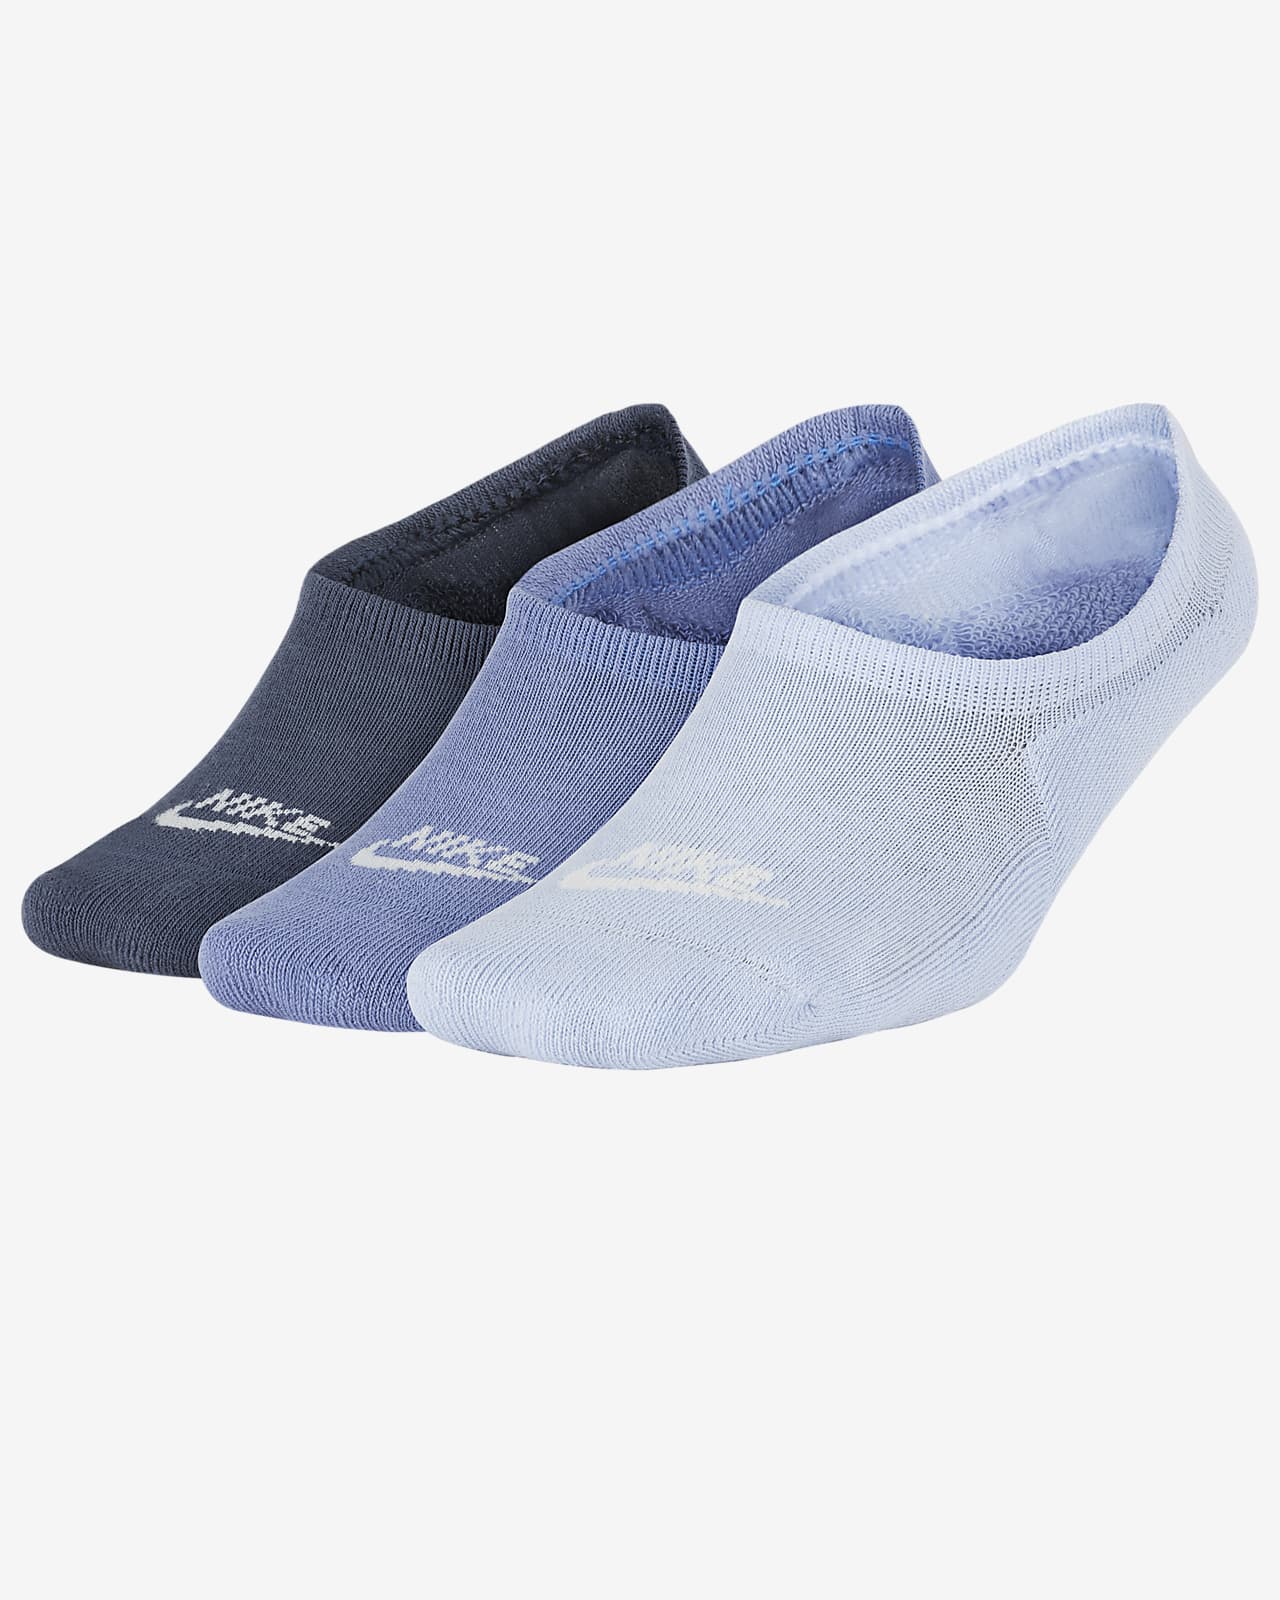 Chaussettes Nike Sportswear Footie (3 paires)